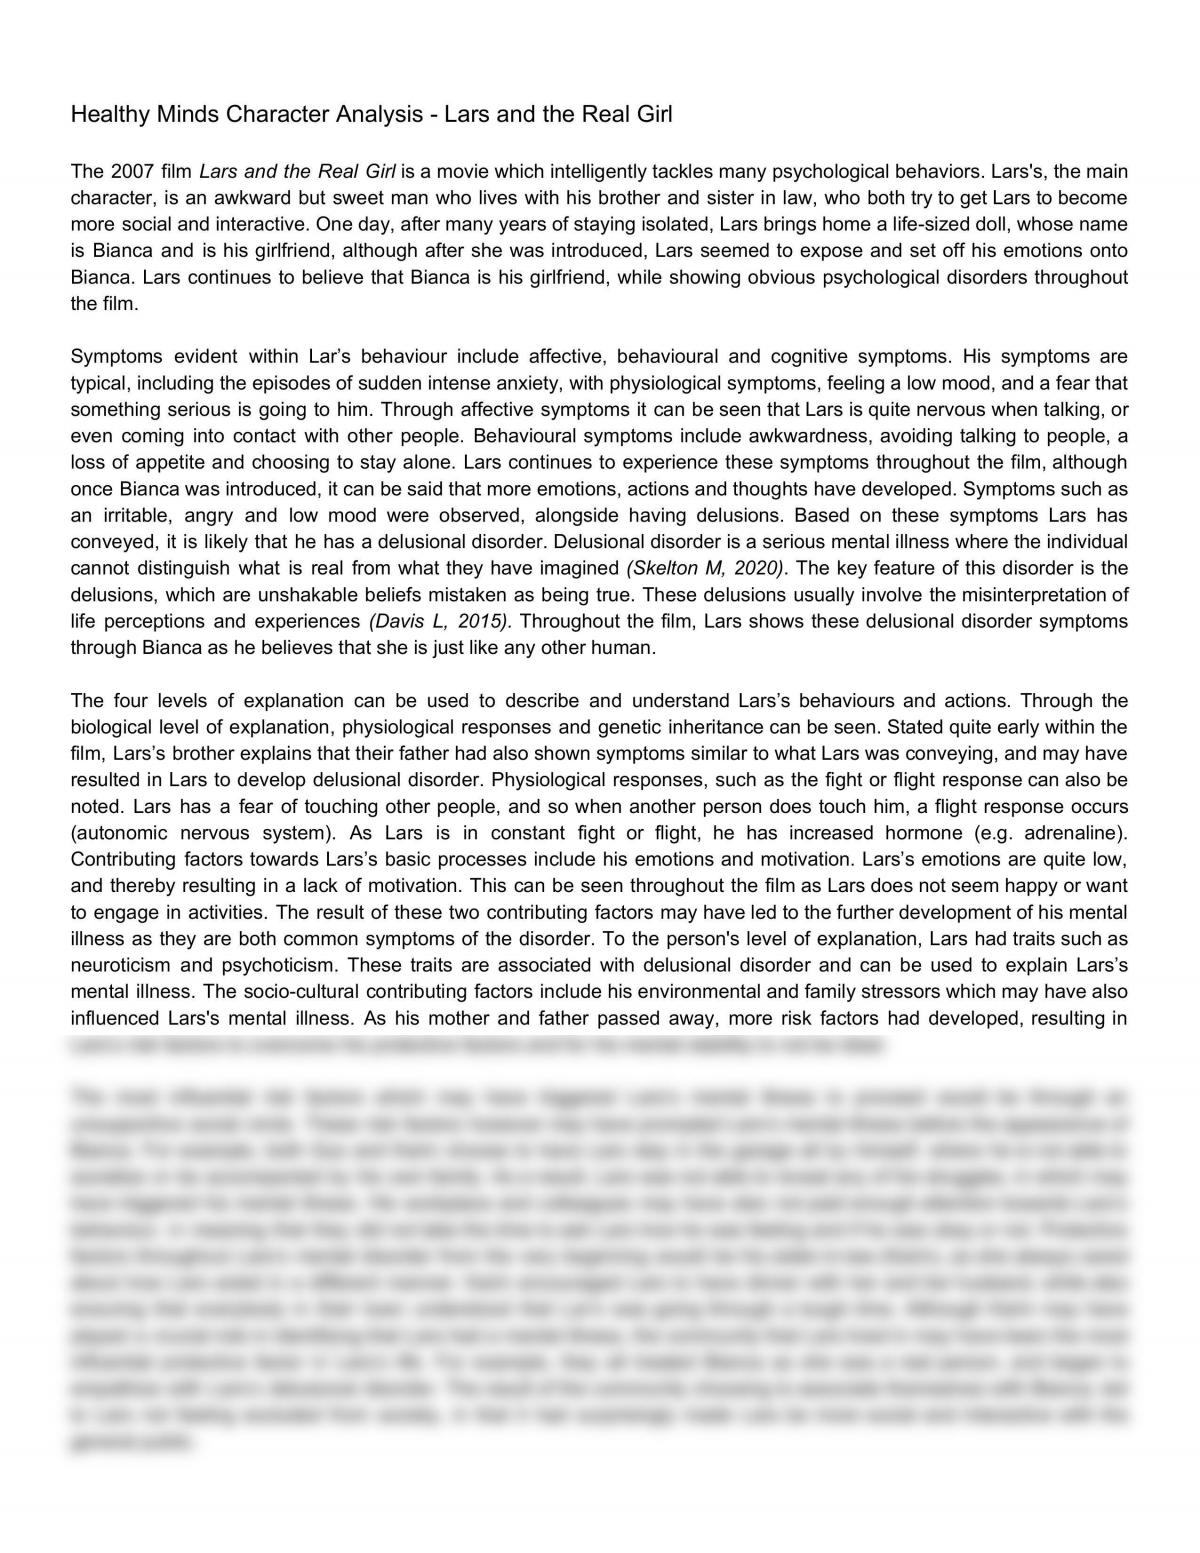 Healthy Minds Character Analysis - Page 1